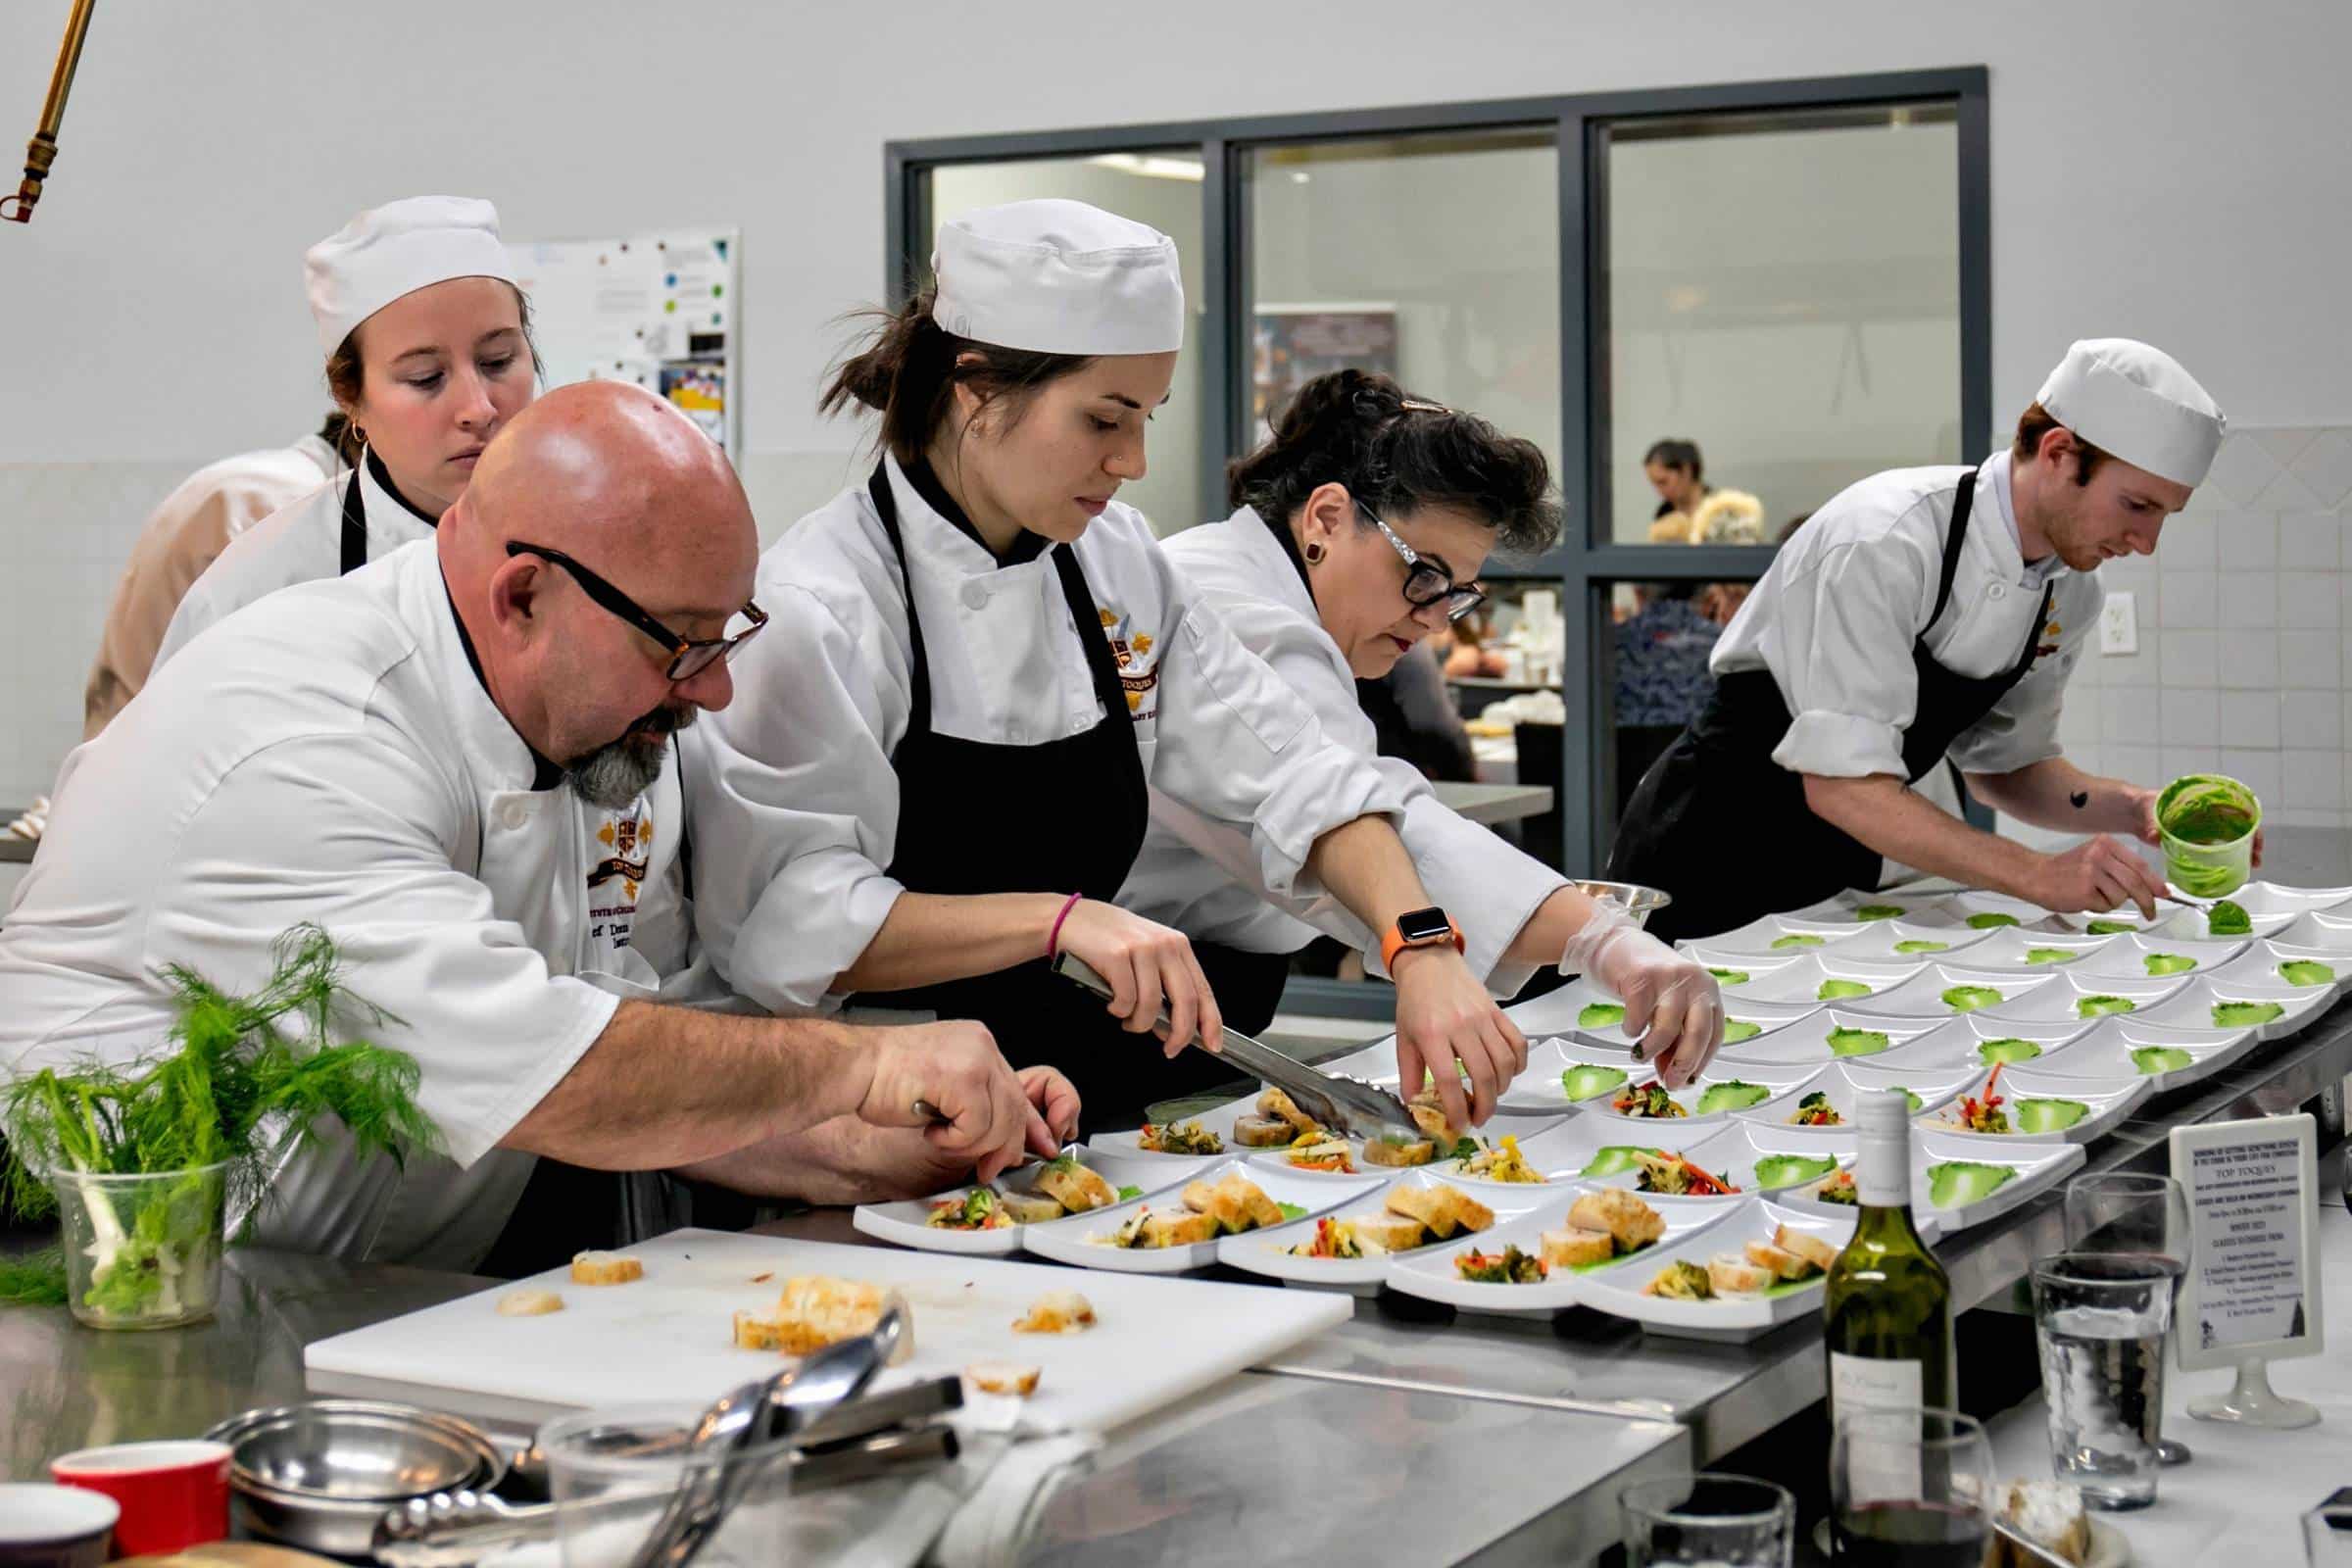 Bond as a Team with Team Building Events - Top Toques Institute of Culinary Excellence